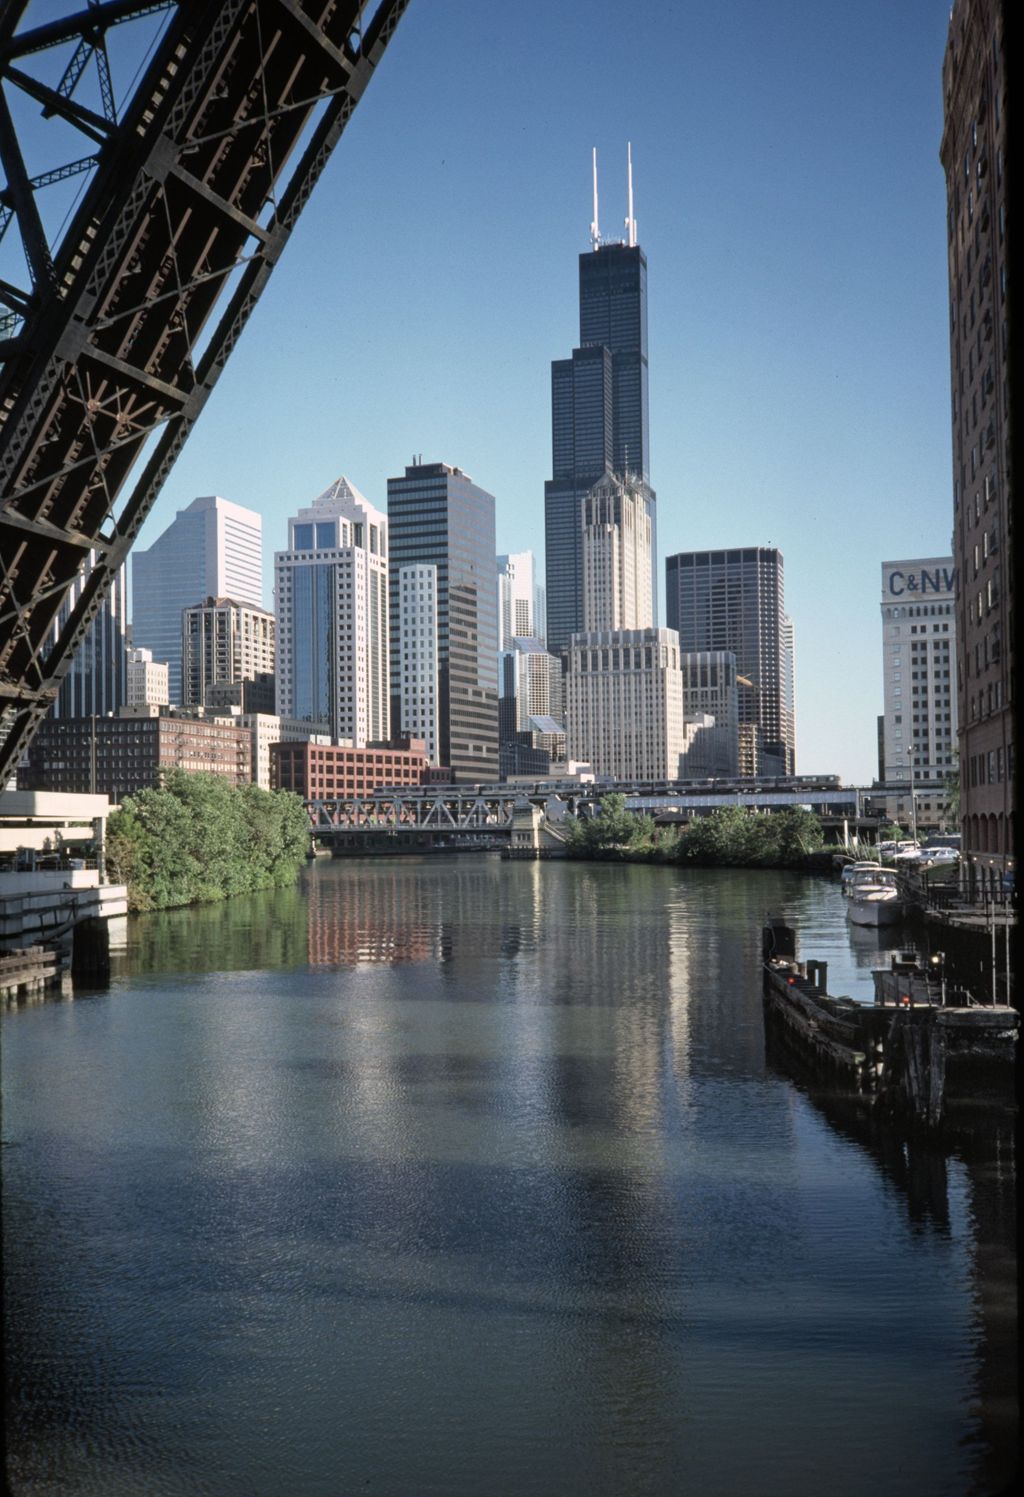 Miniature of Loop skyline from North Branch of Chicago River